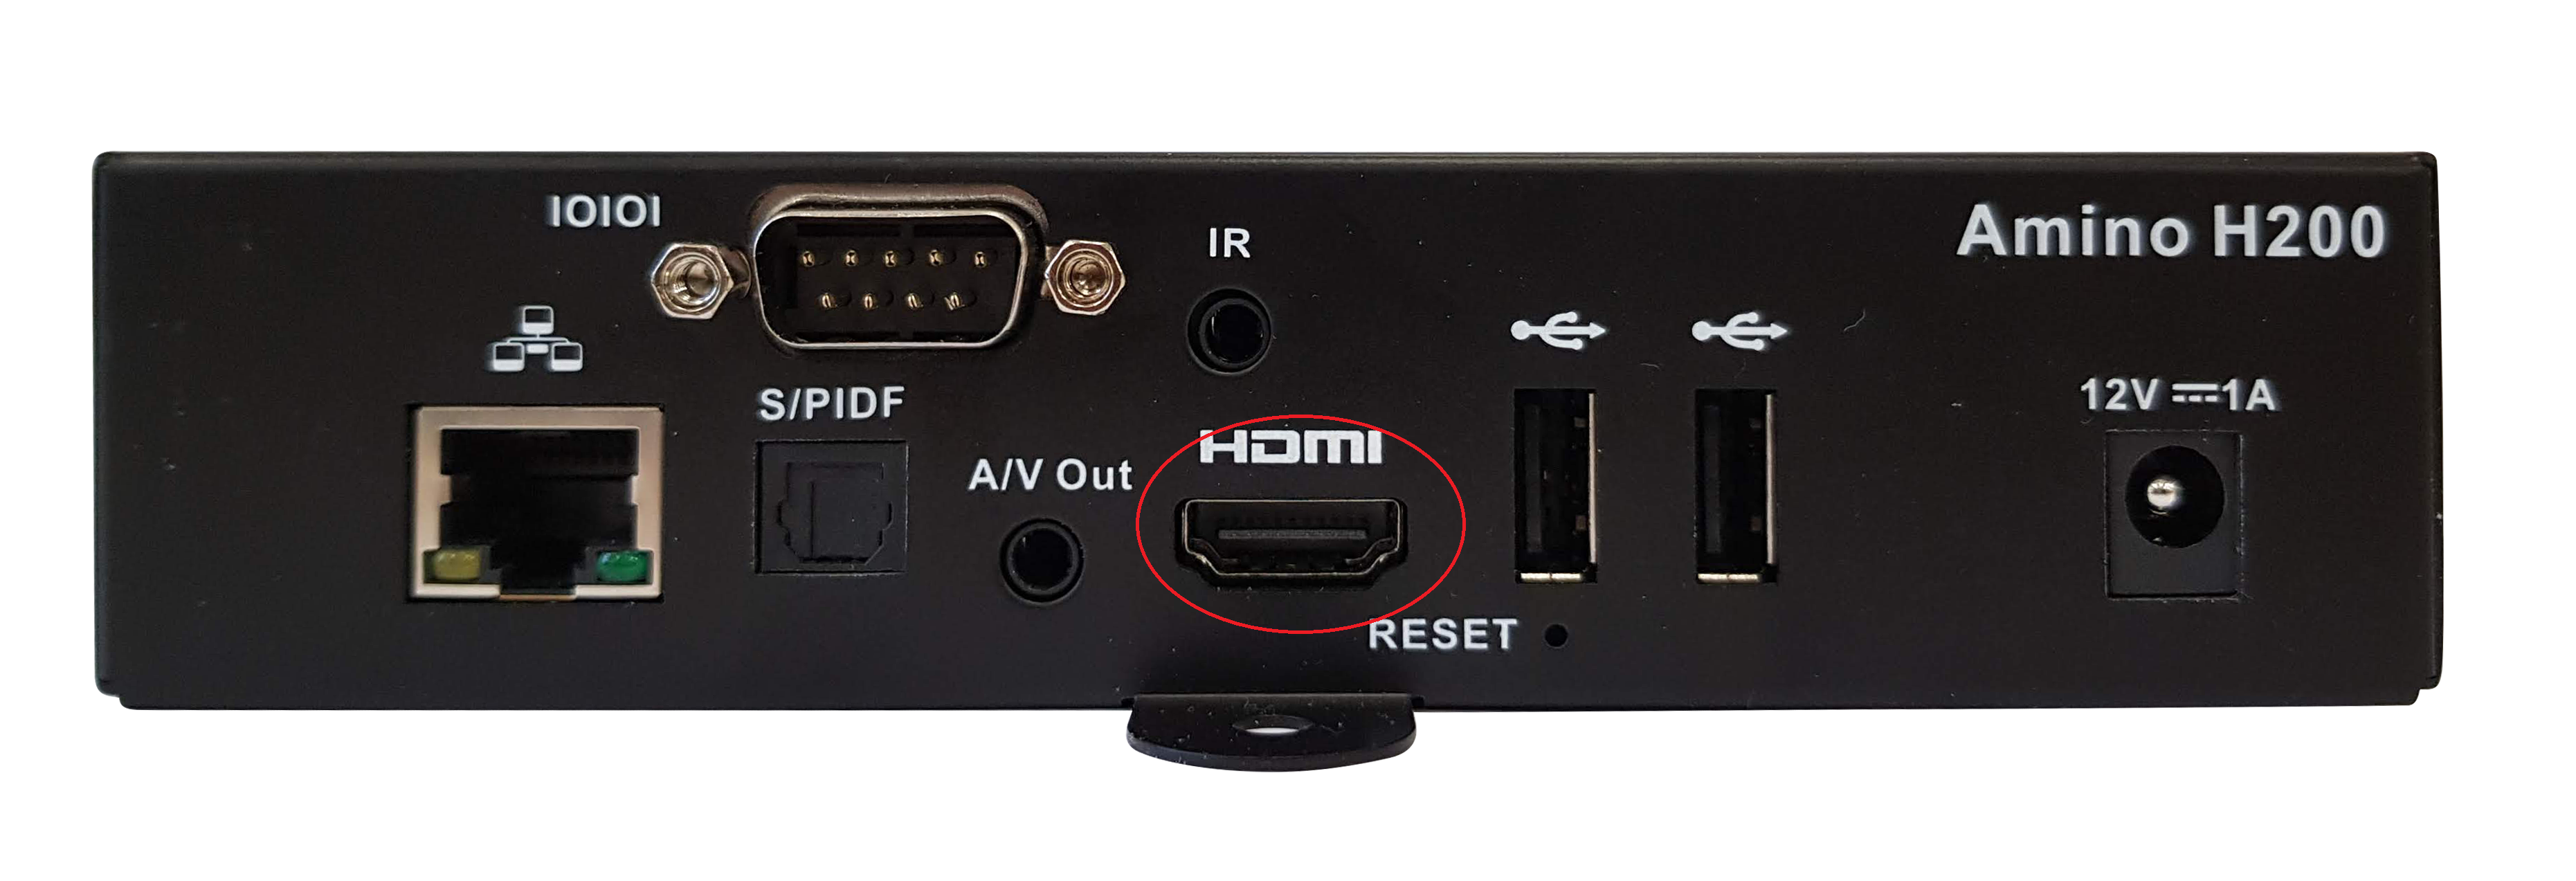 H200_back_hdmi.png